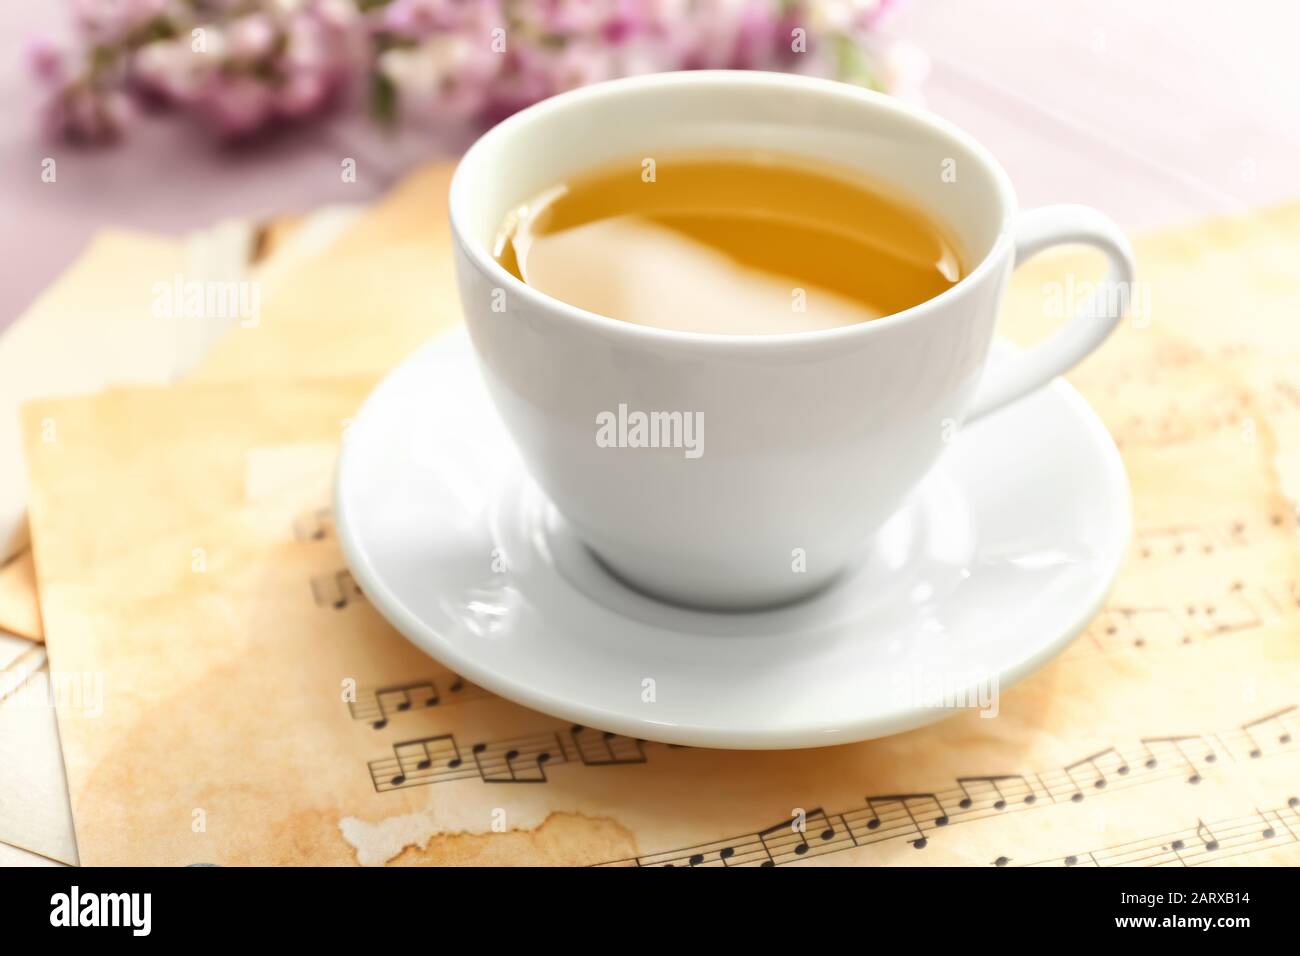 Cup of hot tea with music sheets on table Stock Photo